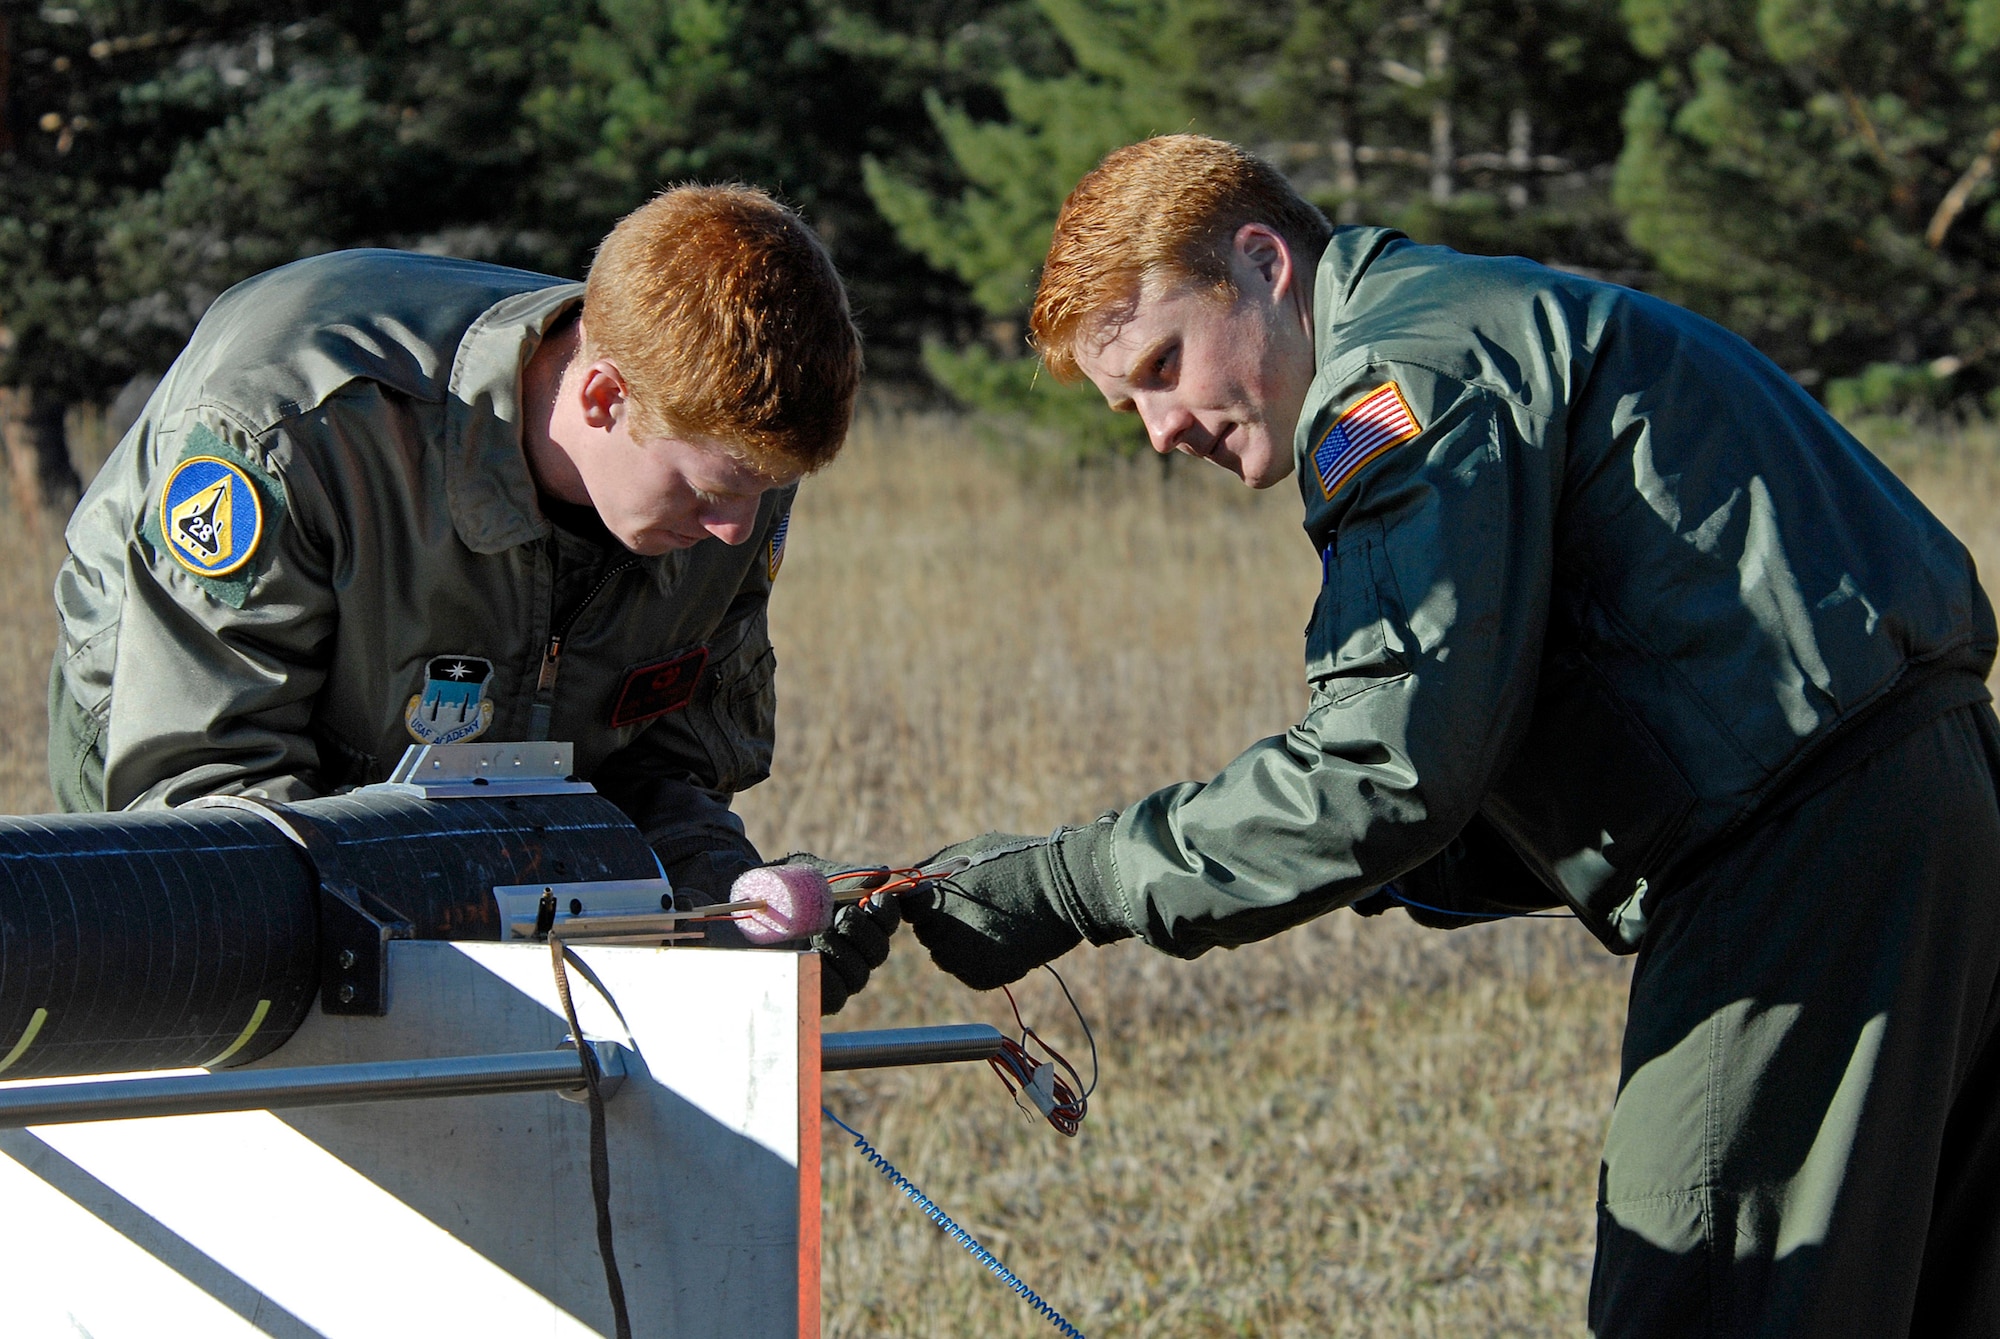 Cadets 1st Class Daniel Richardson and Sean Foote prepare FalconLaunch 6 for a static test fire in Jacks Valley at the U.S. Air Force Academy, Colo., Nov. 4, 2009. The rocket exploded a fraction of a second into the test firing, leaving cadets to determine the cause of the malfunction. (U.S. Air Force photo/Mike Kaplan)